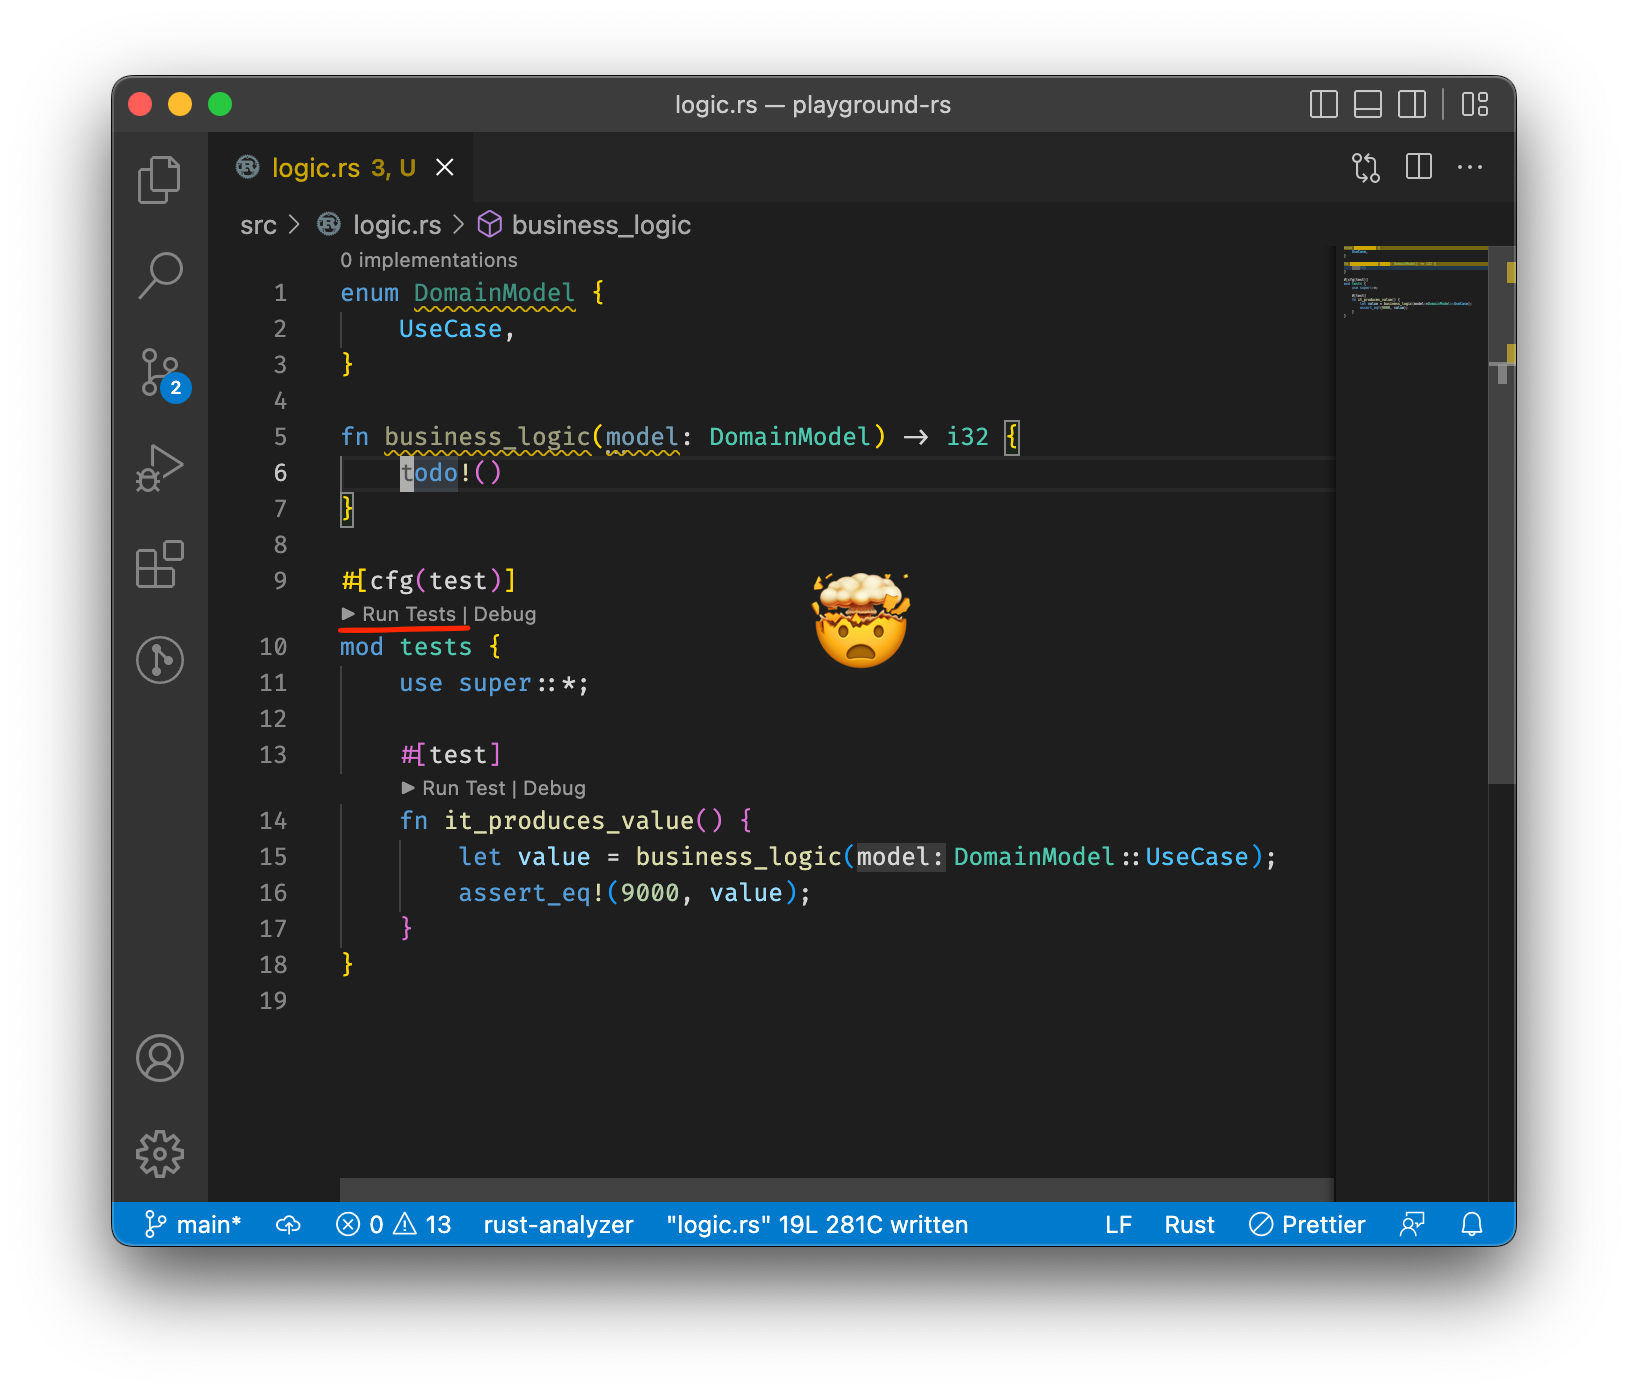 Screenshot of VSCode showing the “Run Tests” annotation on a cfg(test) module, with the cursor outside that module. The annotation is highlighted with a  red underline, and a "mind blown" emoji is superimposed on the image.